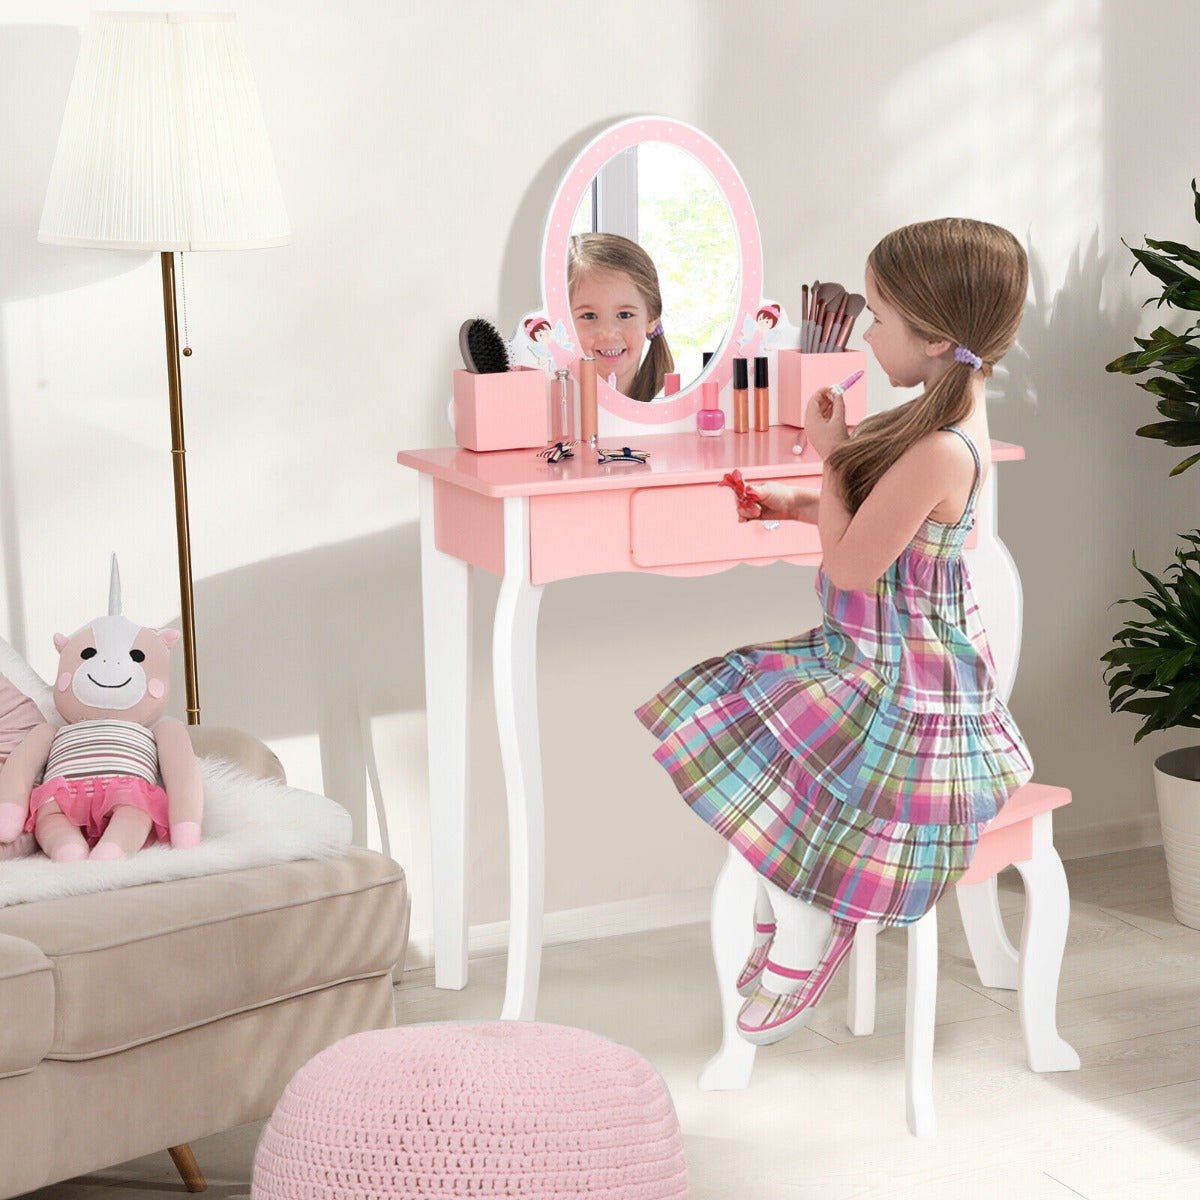 Play Vanity Set in Pink with Heart-Shaped Mirror